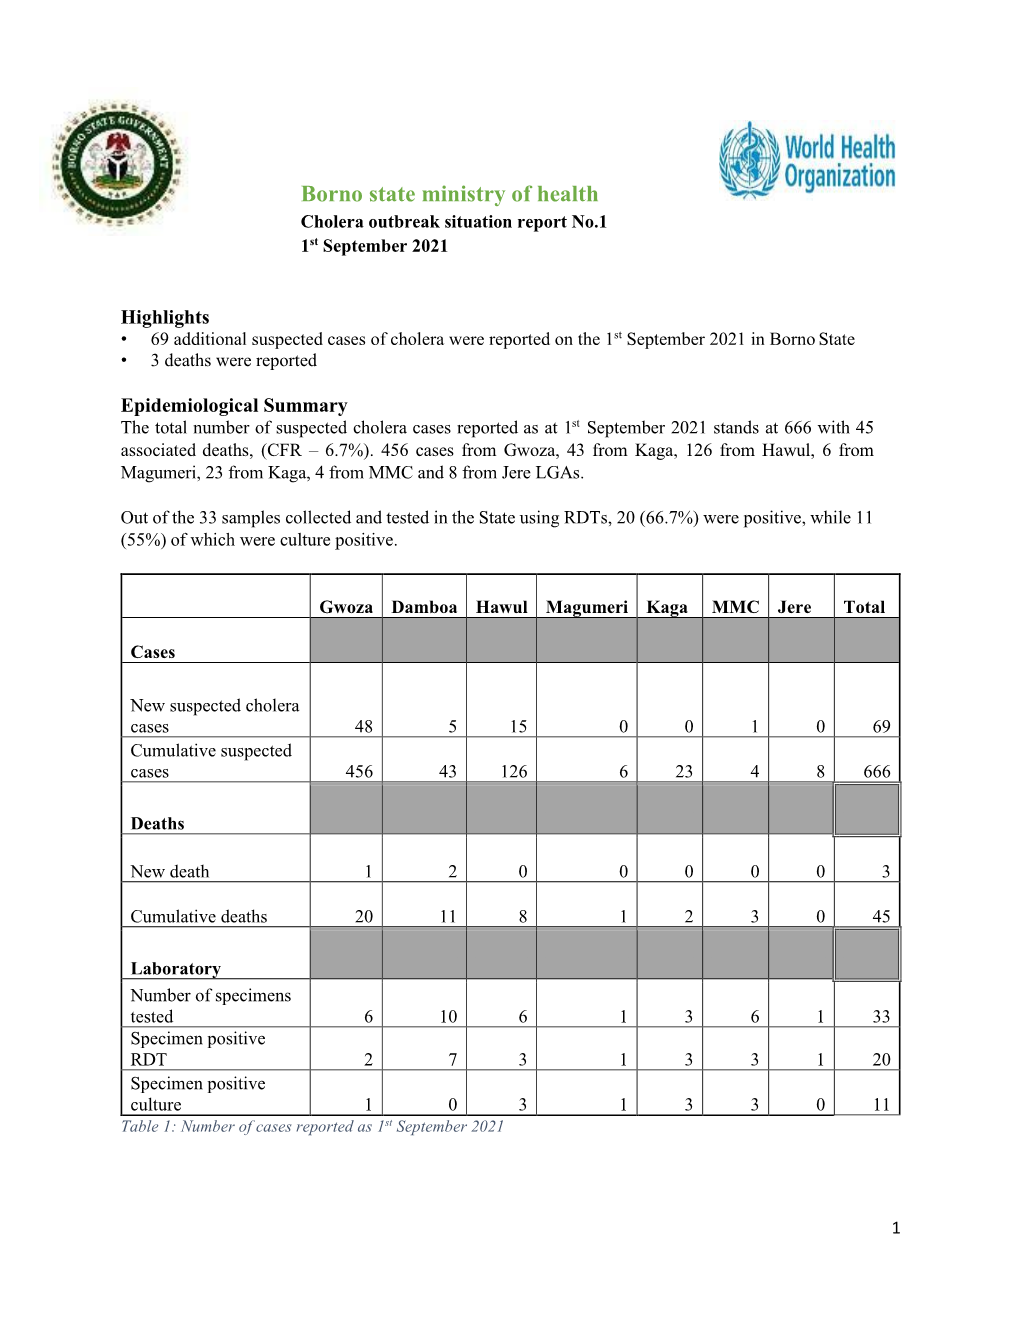 Borno State Ministry of Health Cholera Outbreak Situation Report No.1 1St September 2021